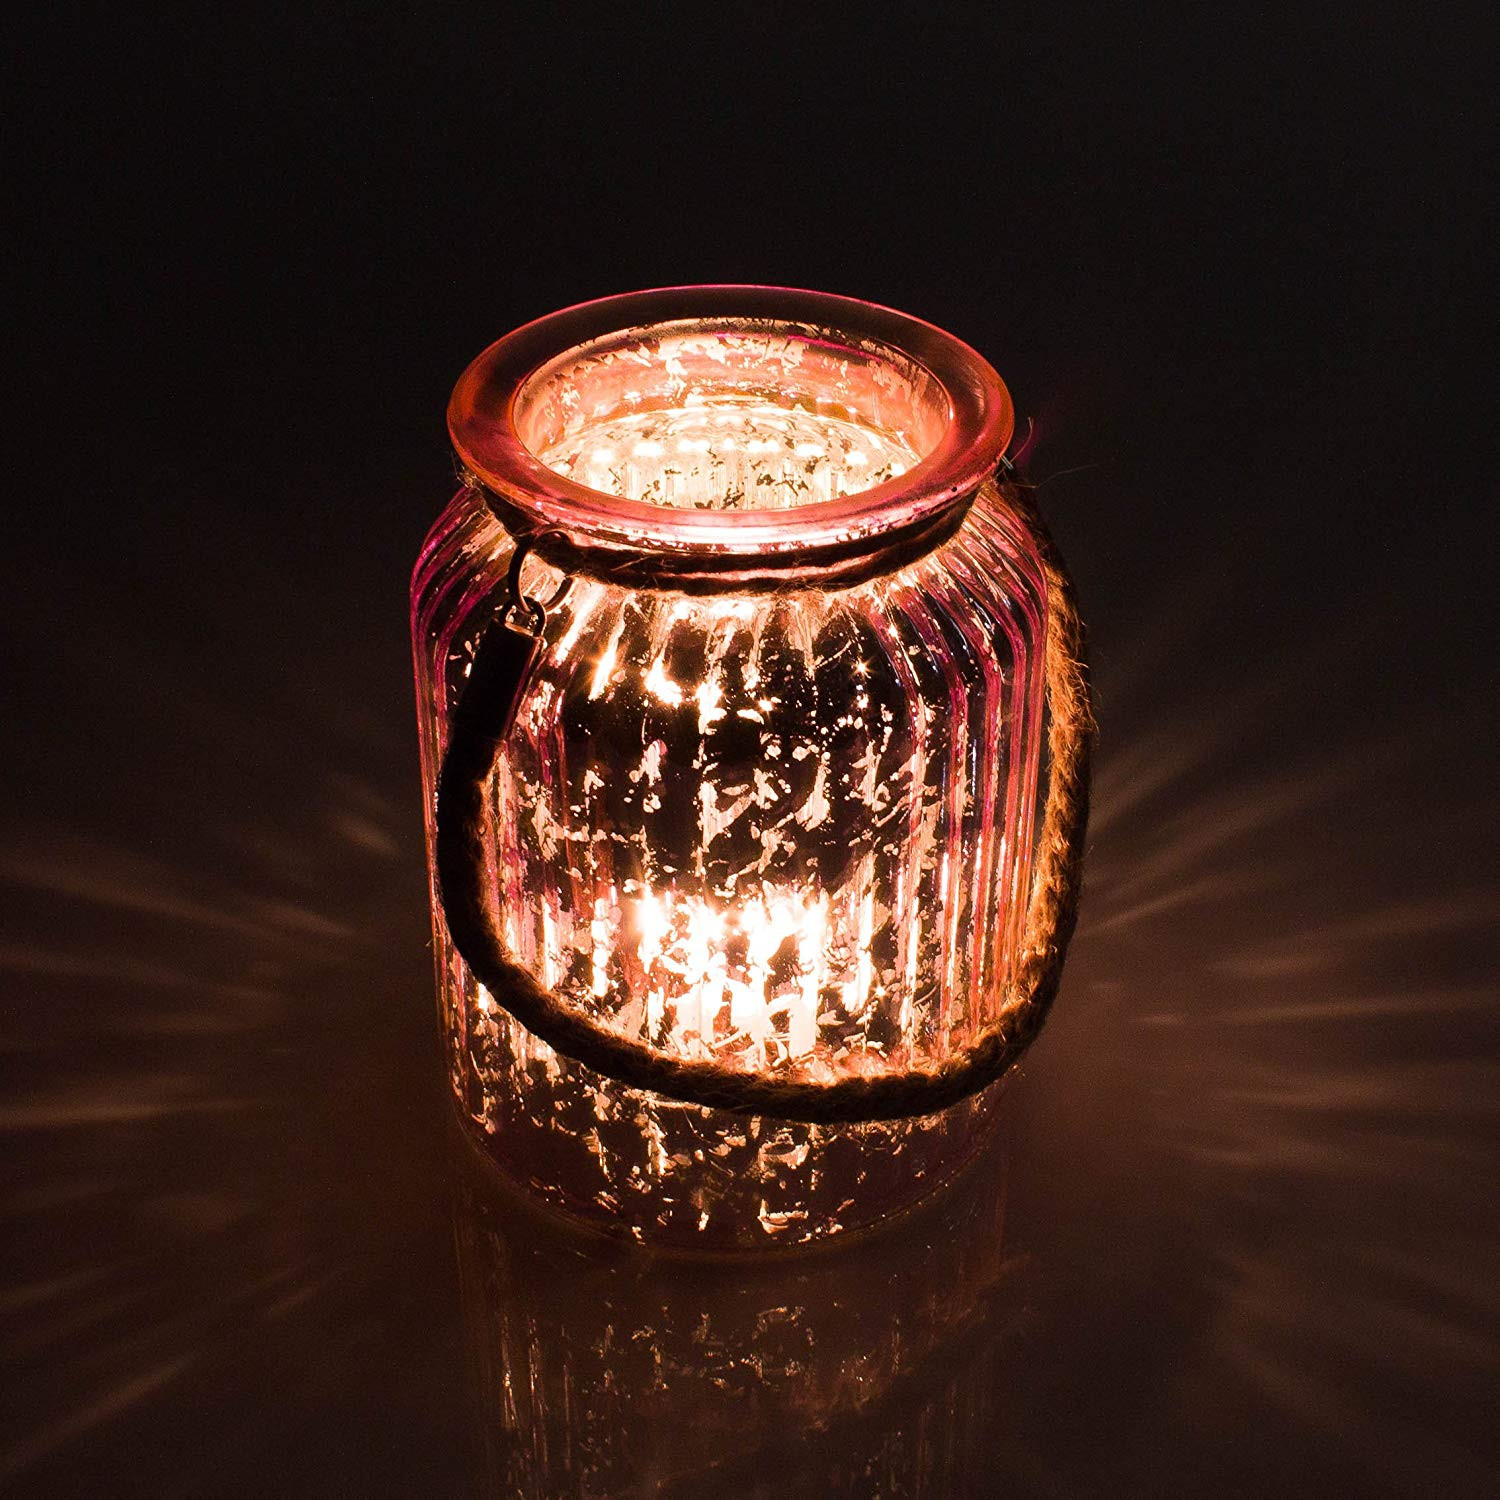 17 Nice Amber Crackle Glass Vase 2024 free download amber crackle glass vase of inna glas lantern glass glass candle holder laisa with handle light regarding inna glas lantern glass glass candle holder laisa with handle light pink crackled 5 